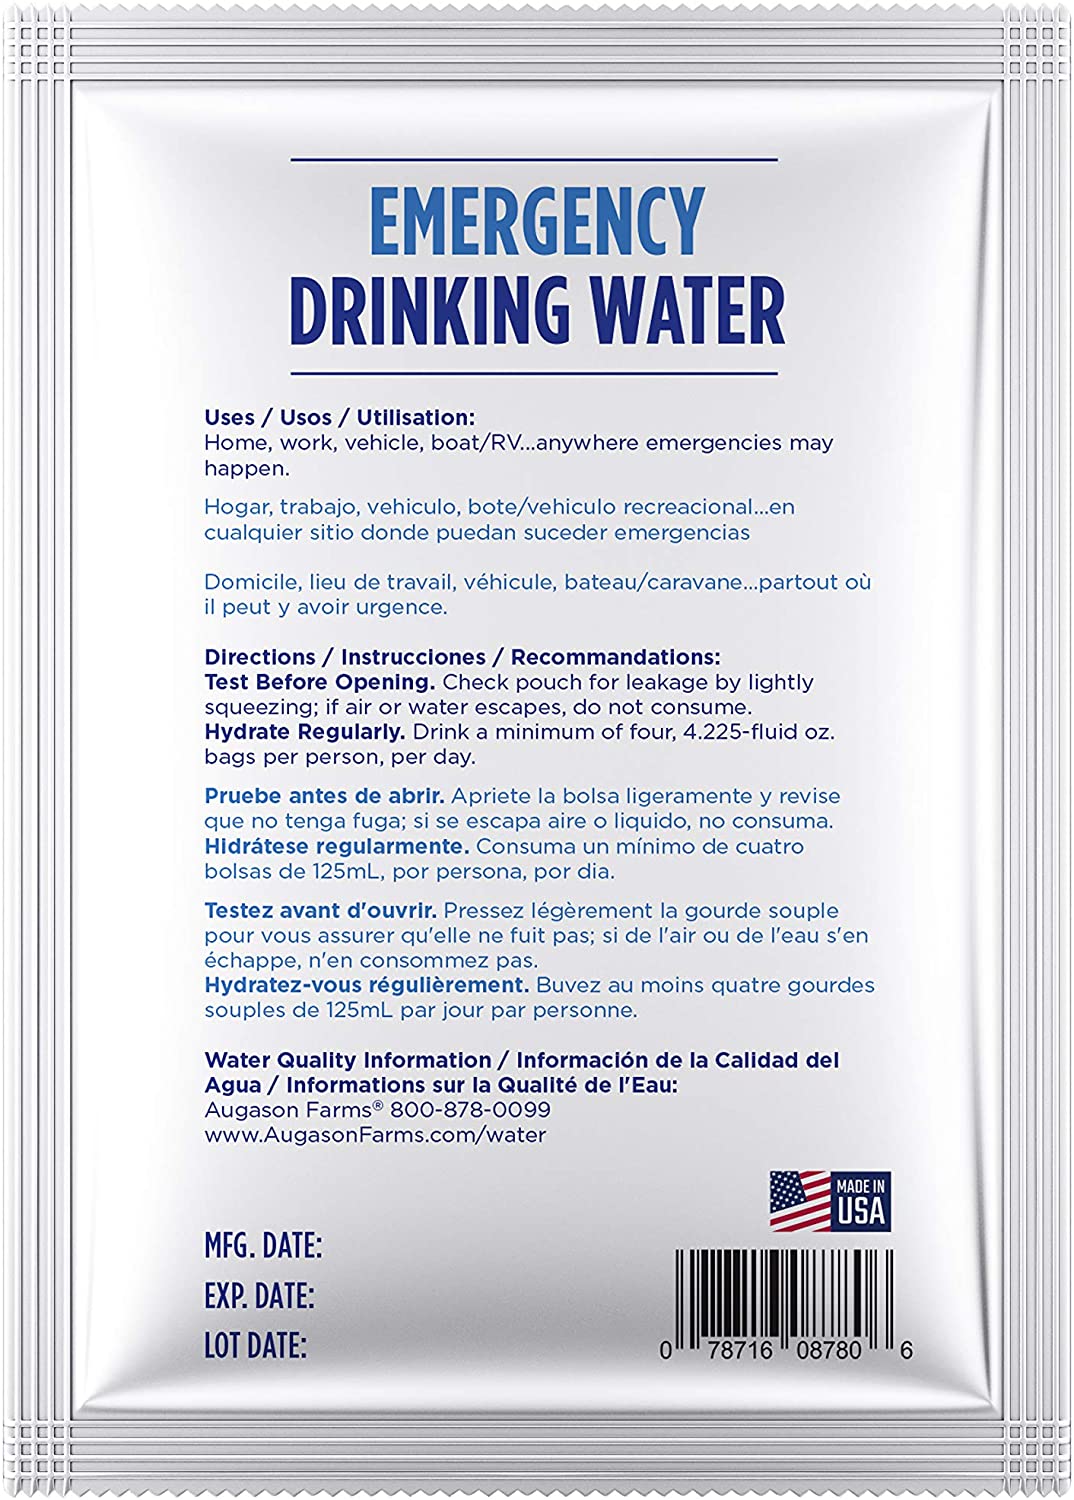 Emergency drinking water packets.